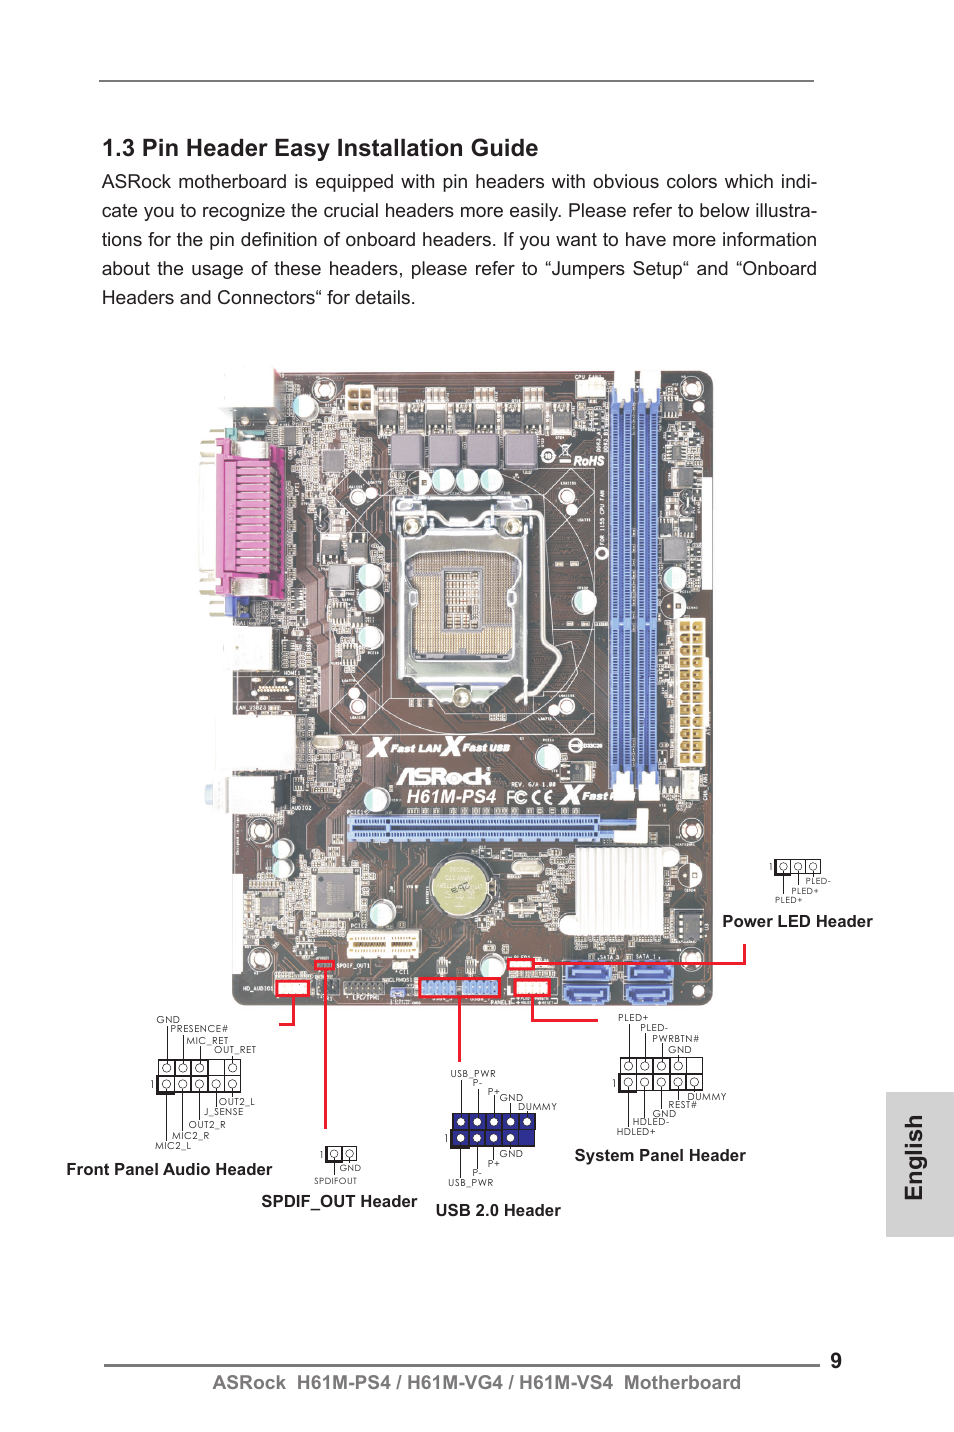 English 1.3 pin header easy installation guide, Front panel audio System panel header usb 2.0 header | ASRock H61M-VG4 User | Page 9 / 52